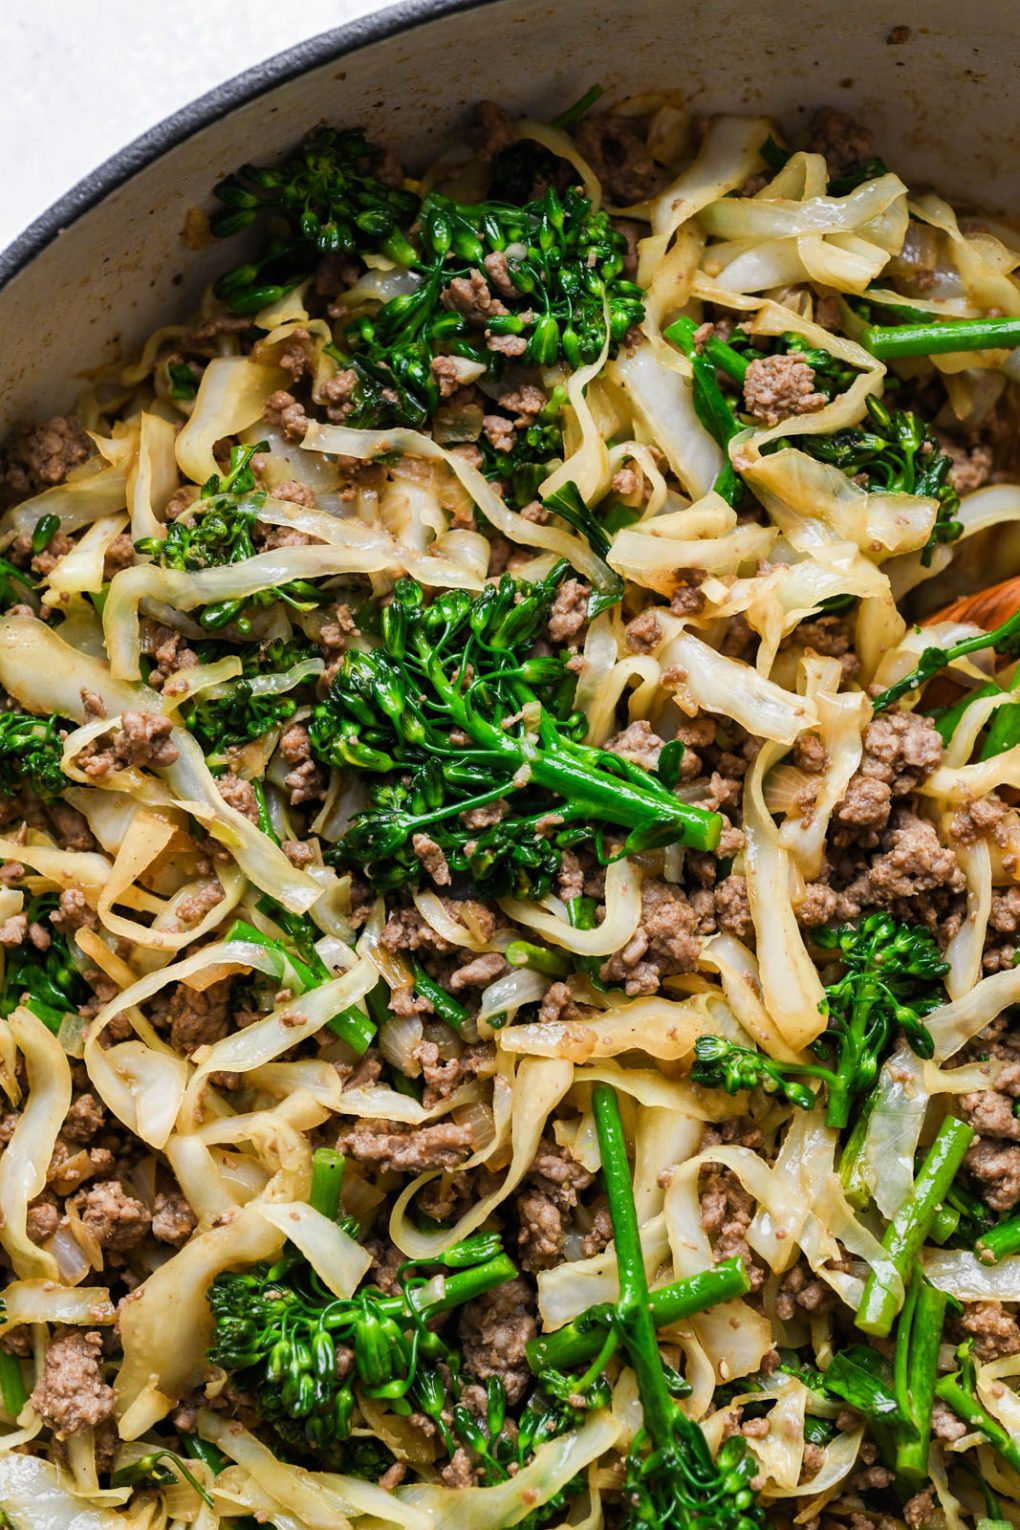 Close up shot of cooked Whole30 ground beef stir fry with cabbage - also contains bright green pieces of broccolini.